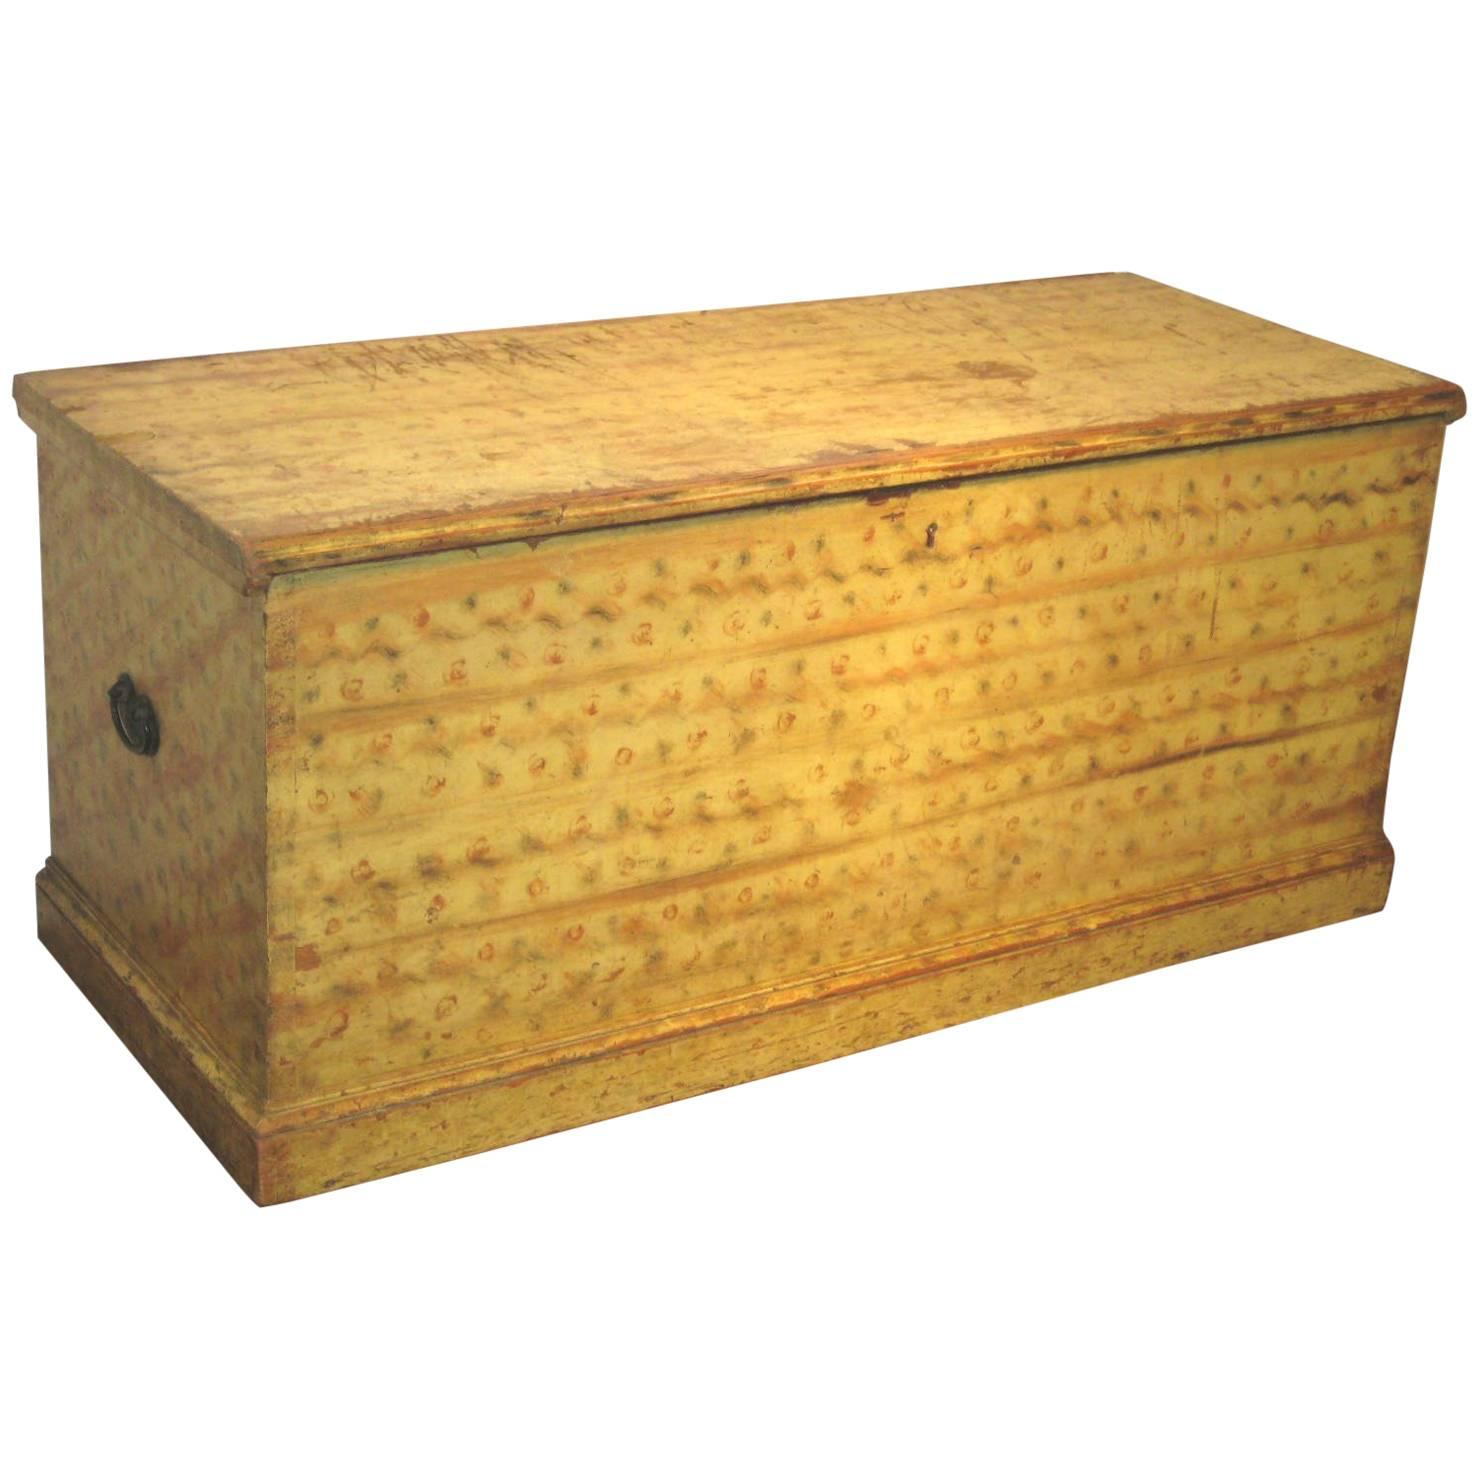 New England Yellow and Polychrome-Decorated Pine Chest For Sale